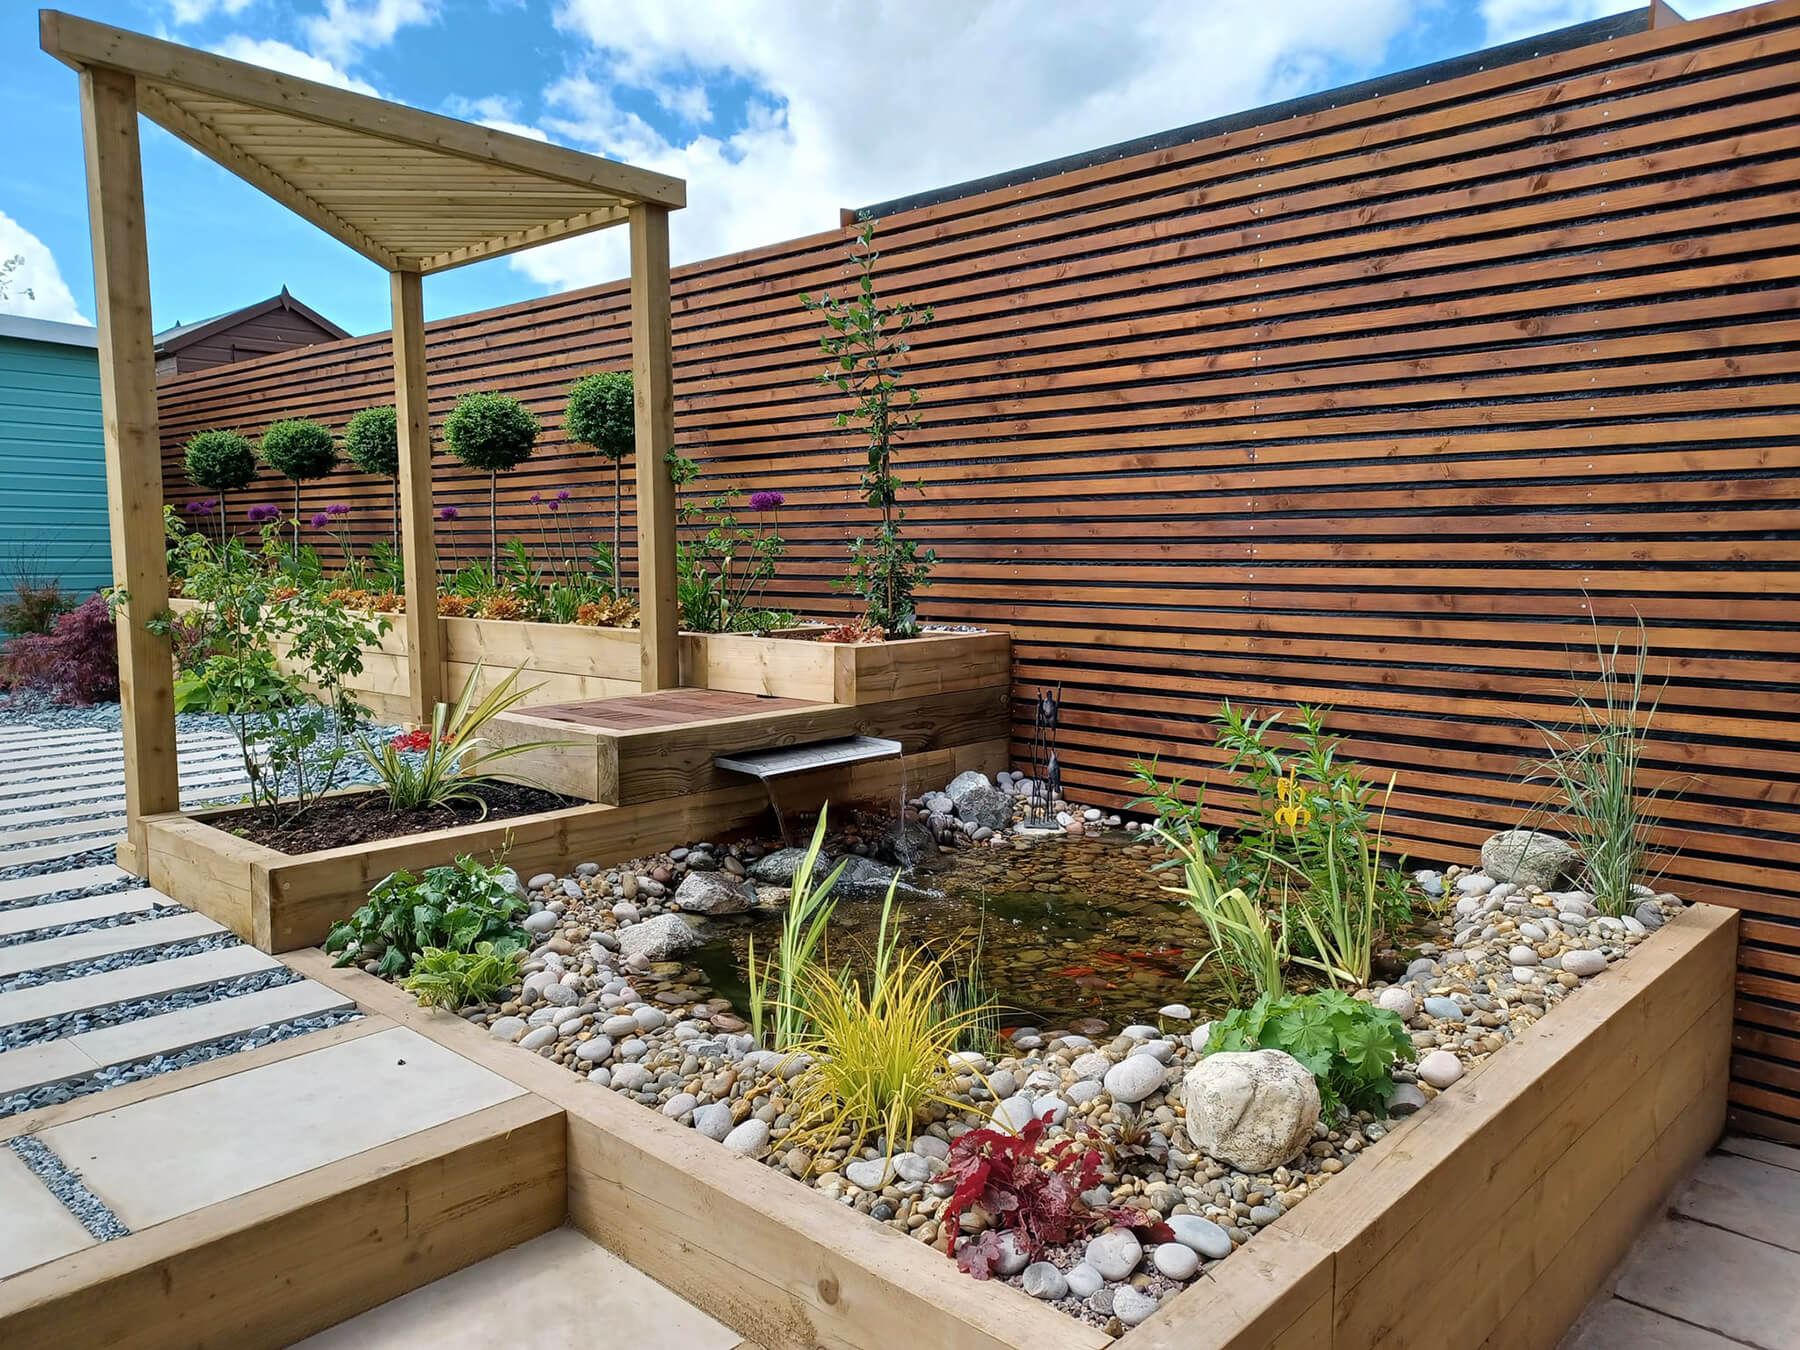 Our landscape gardeners included a water feature in this garden design